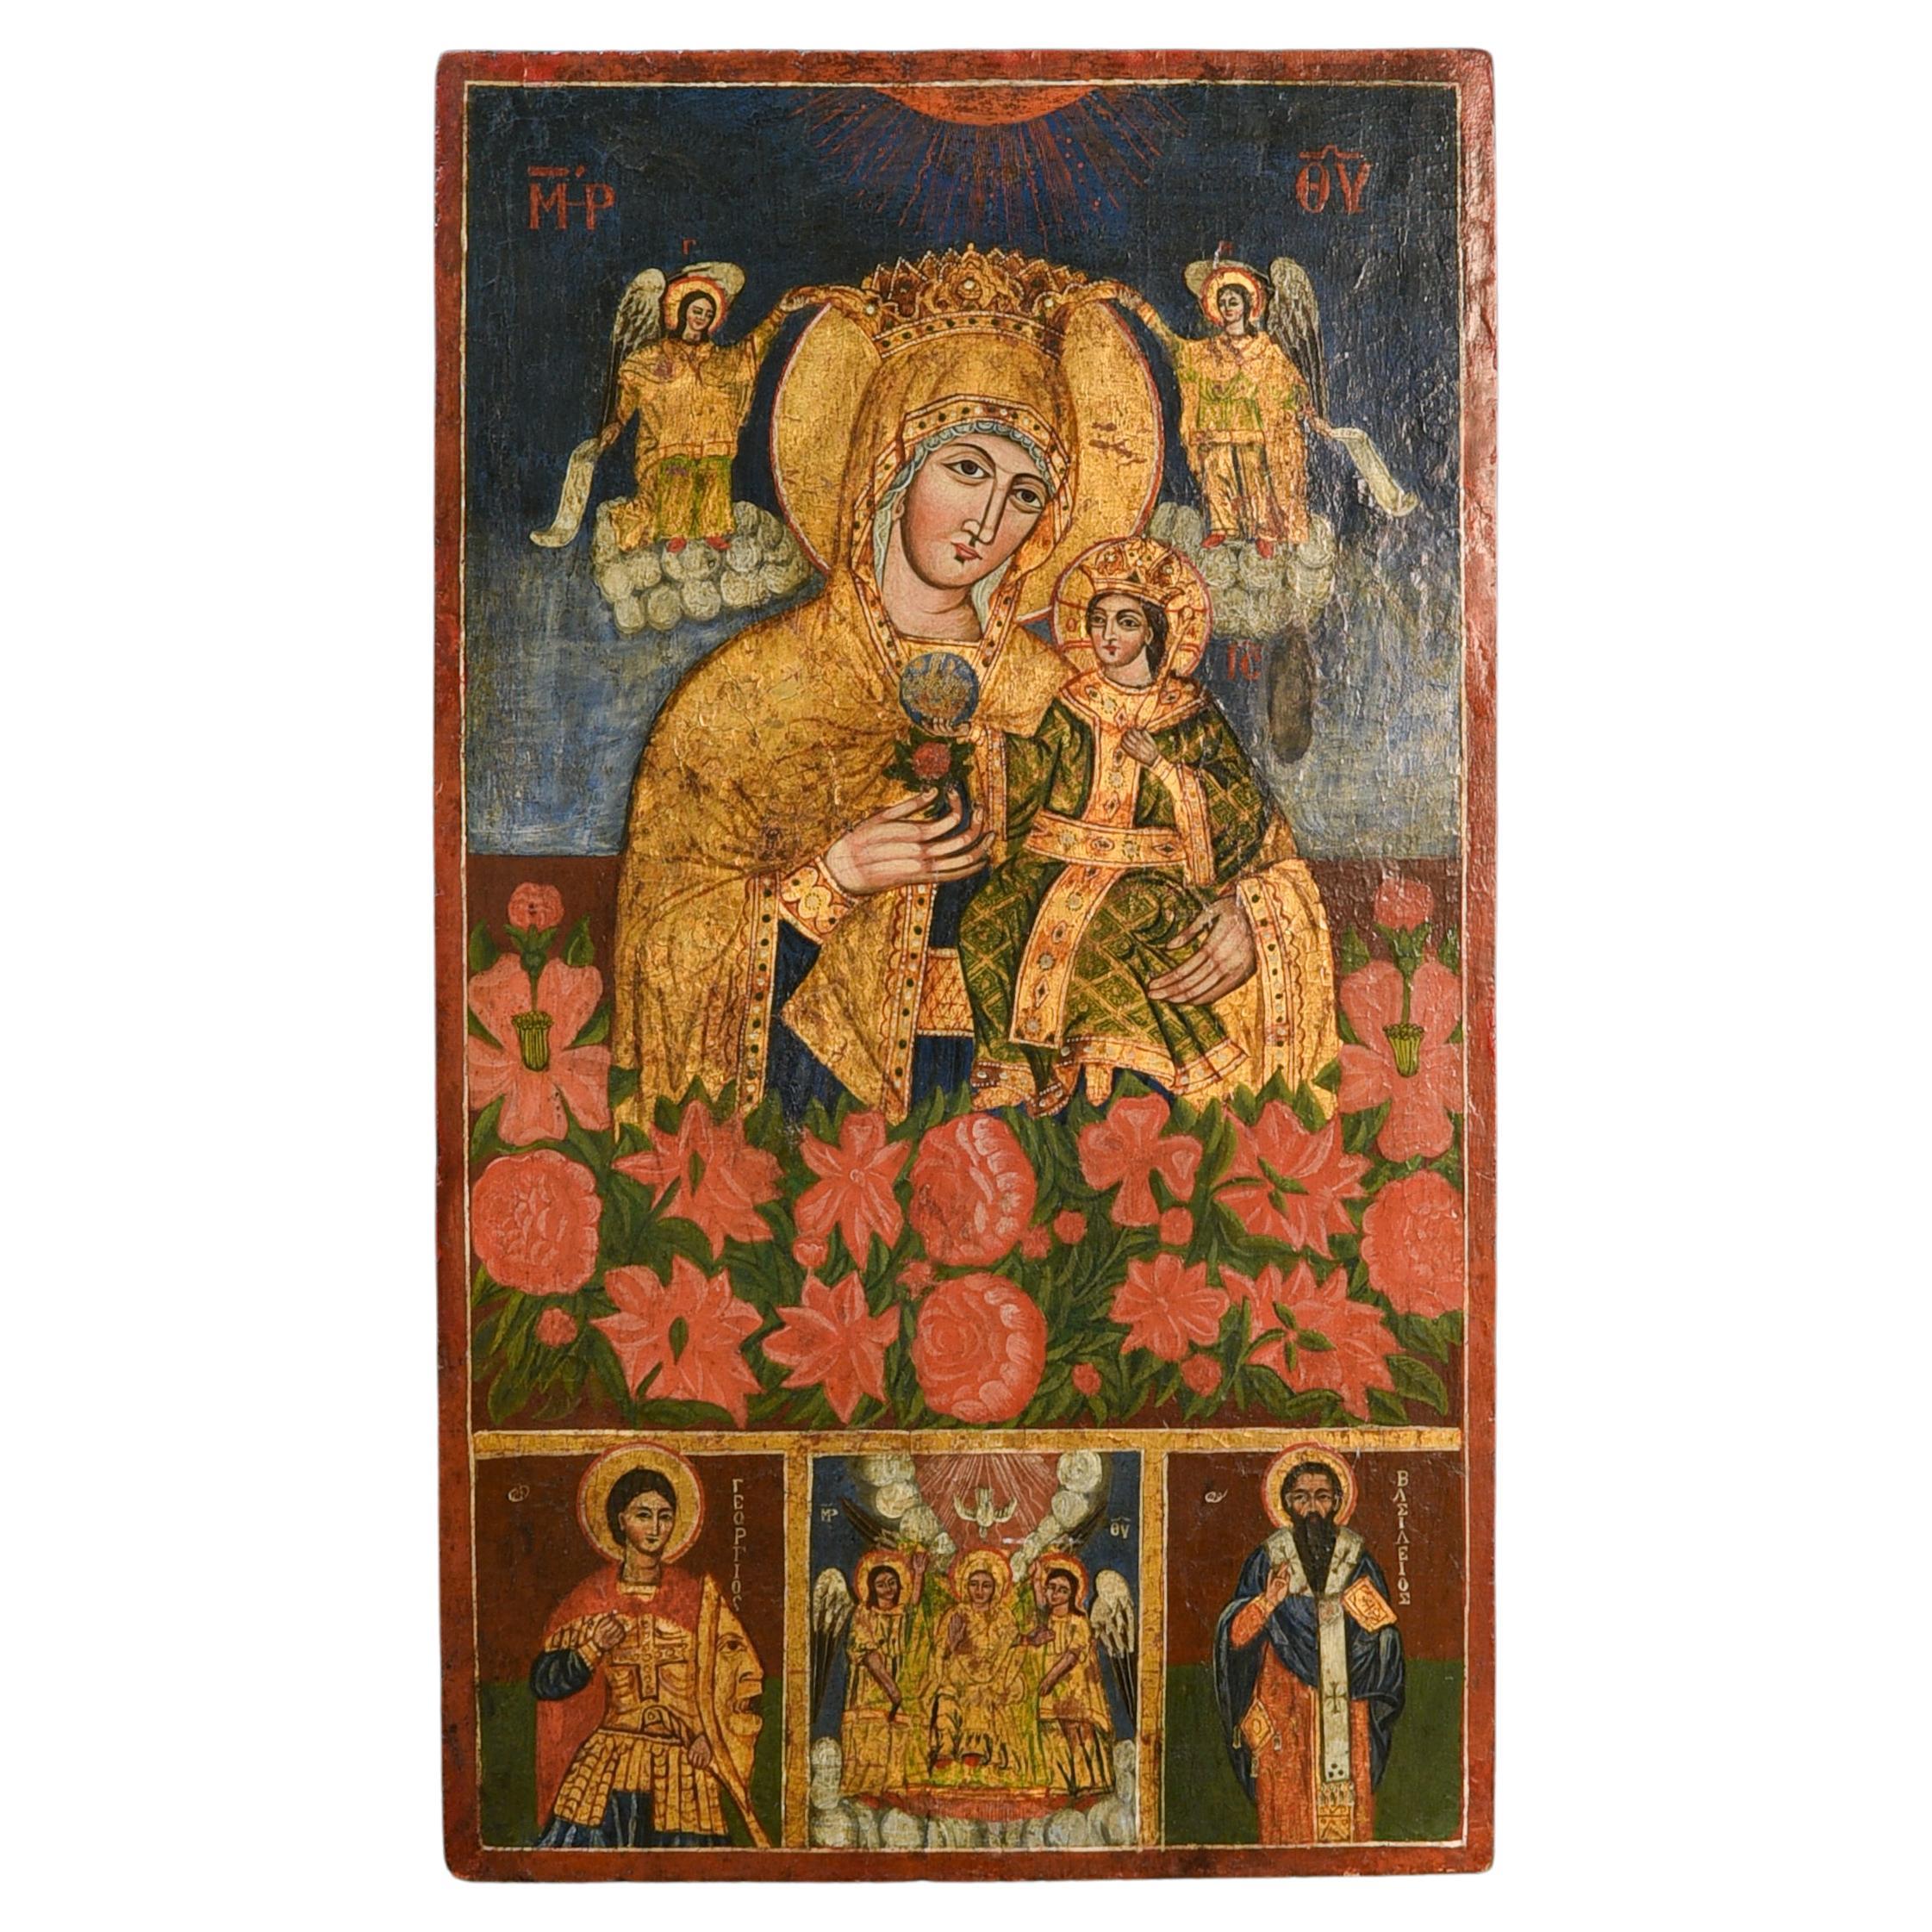 Greek orthodox icon (1800) painted on wooden pannel